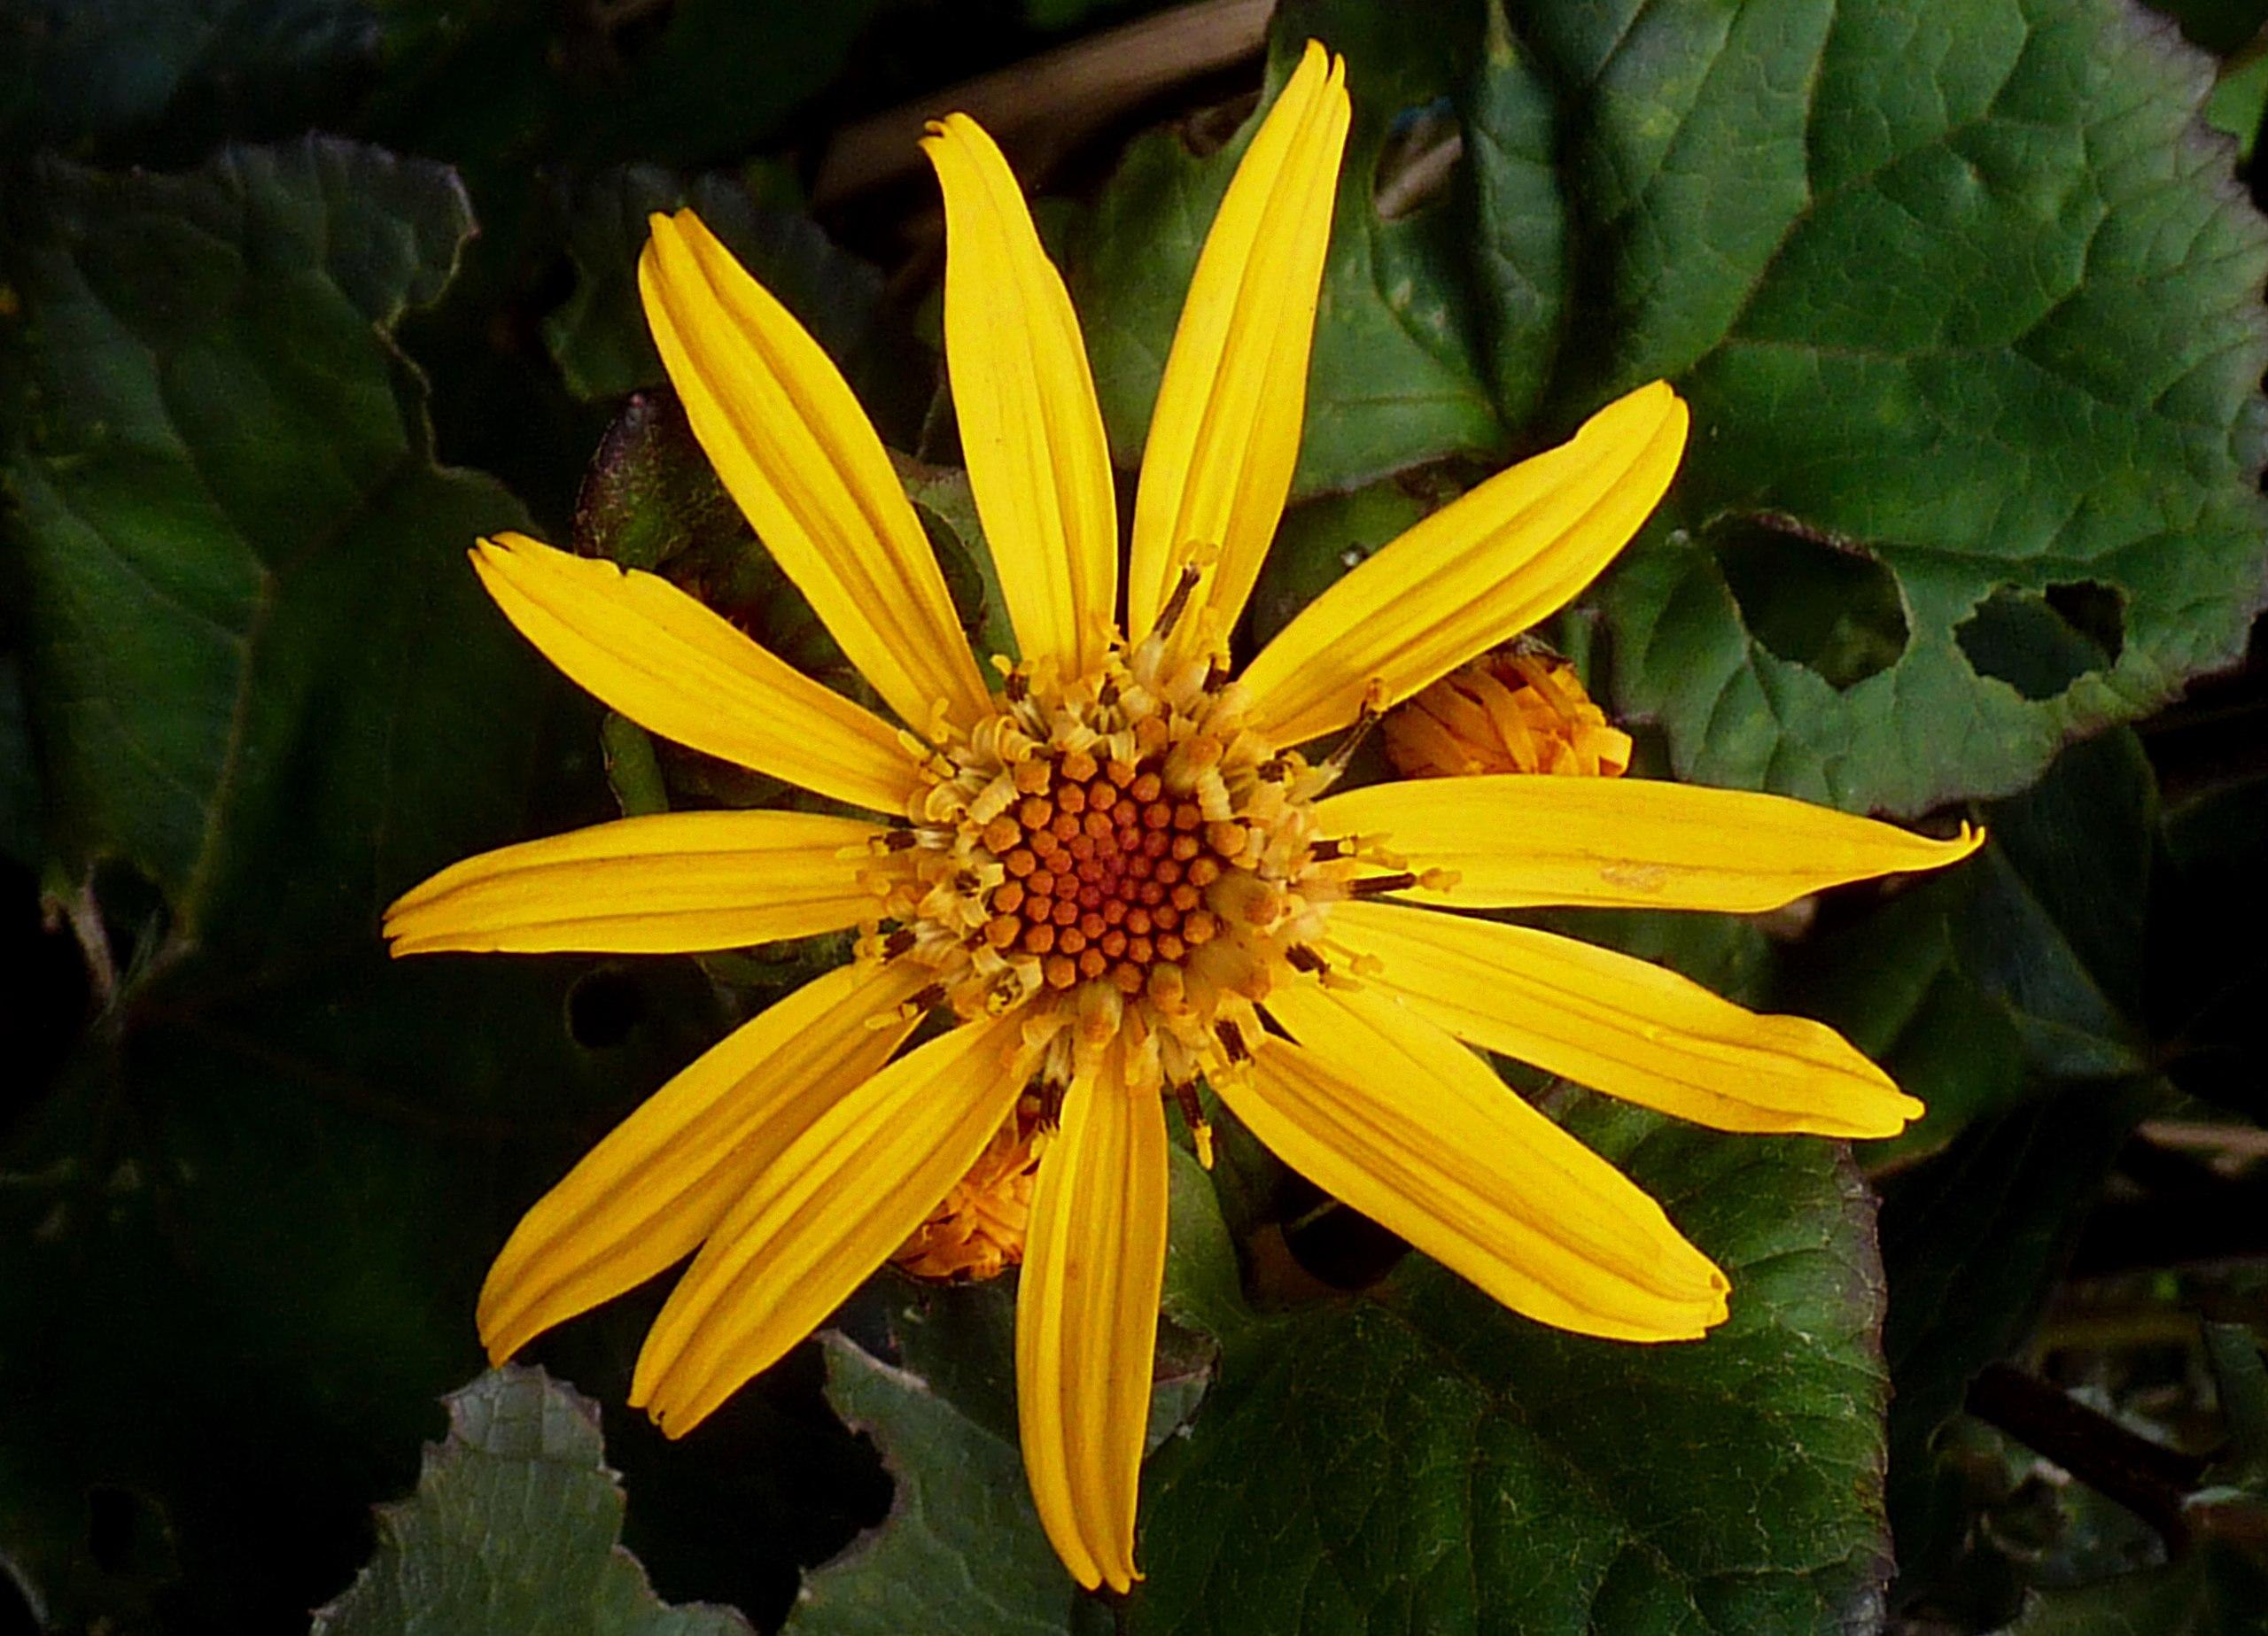 Yellow flowers with orange center, green leaves and yellow-brown anthers.